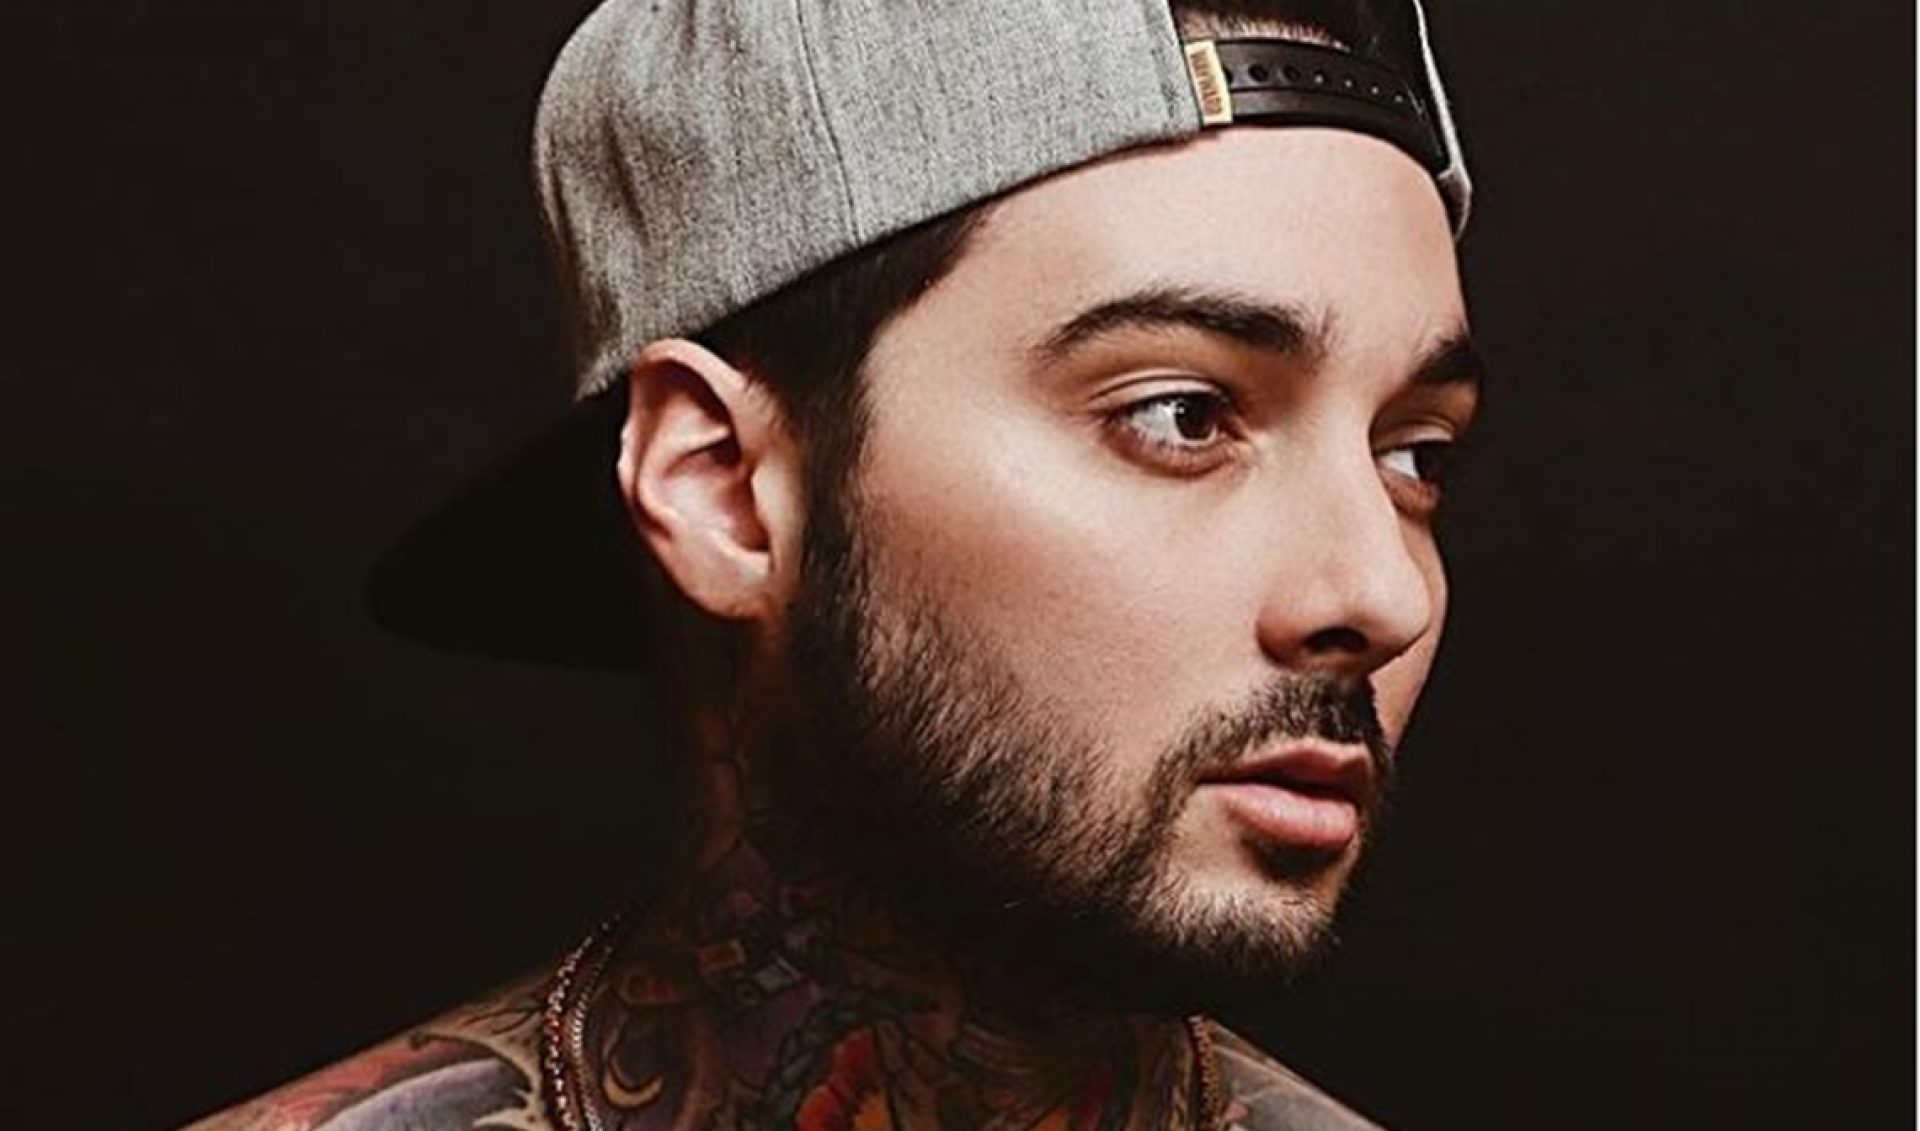 Tattooist Romeo Lacoste On Inappropriate Messages To Young Fans: "Some Are Real, Some Fabricated" - Tubefilter